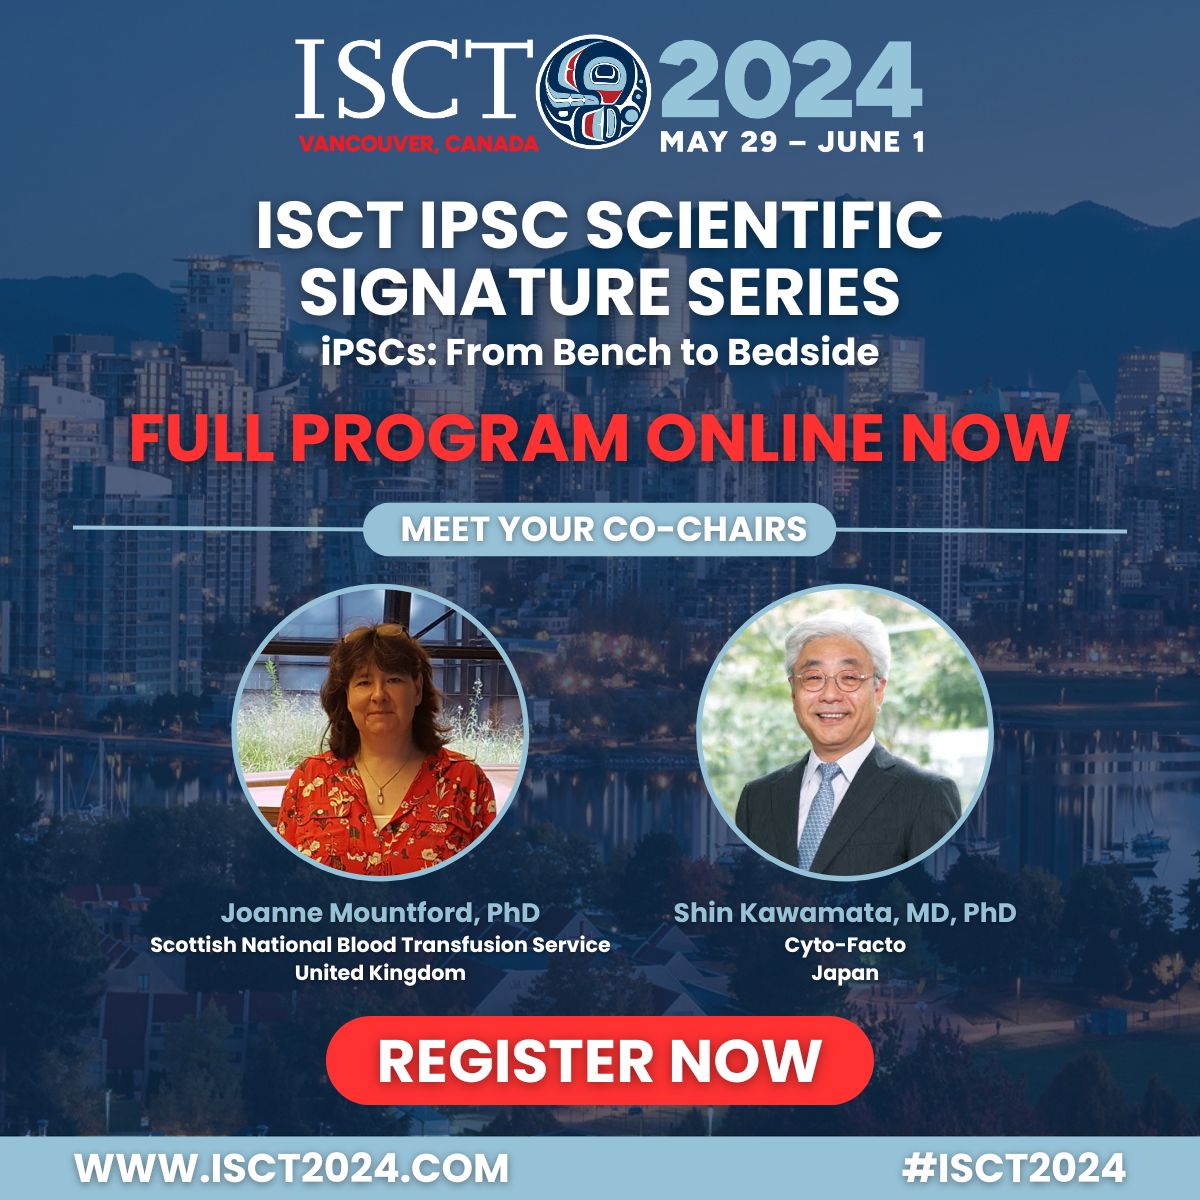 Join us at the iPSC Signature Series event as we carve out a roadmap for future regulatory approvals and clinical adoption of iPSC-based therapies. Learn more about what to expect at the iPSC event of the year, full program online now! buff.ly/3xnxSjE #ISCT2024